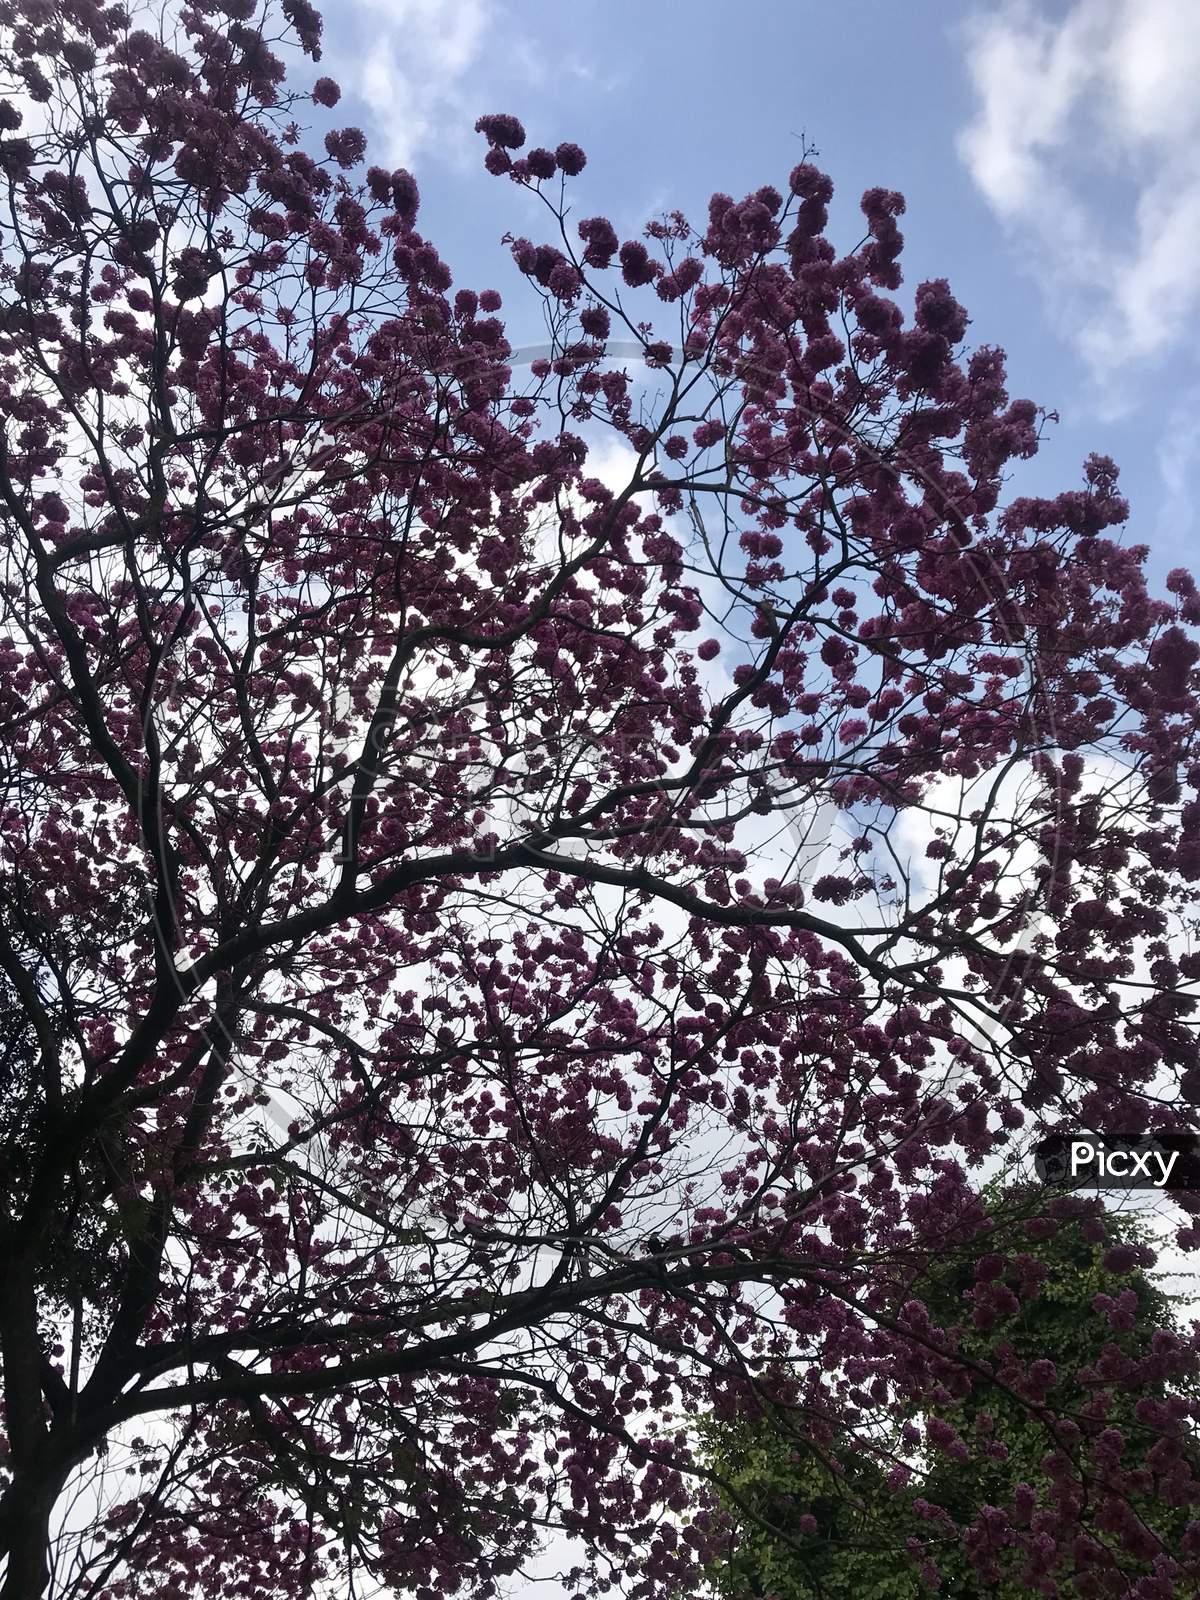 Canopy of Tree With Flowers Over Sky